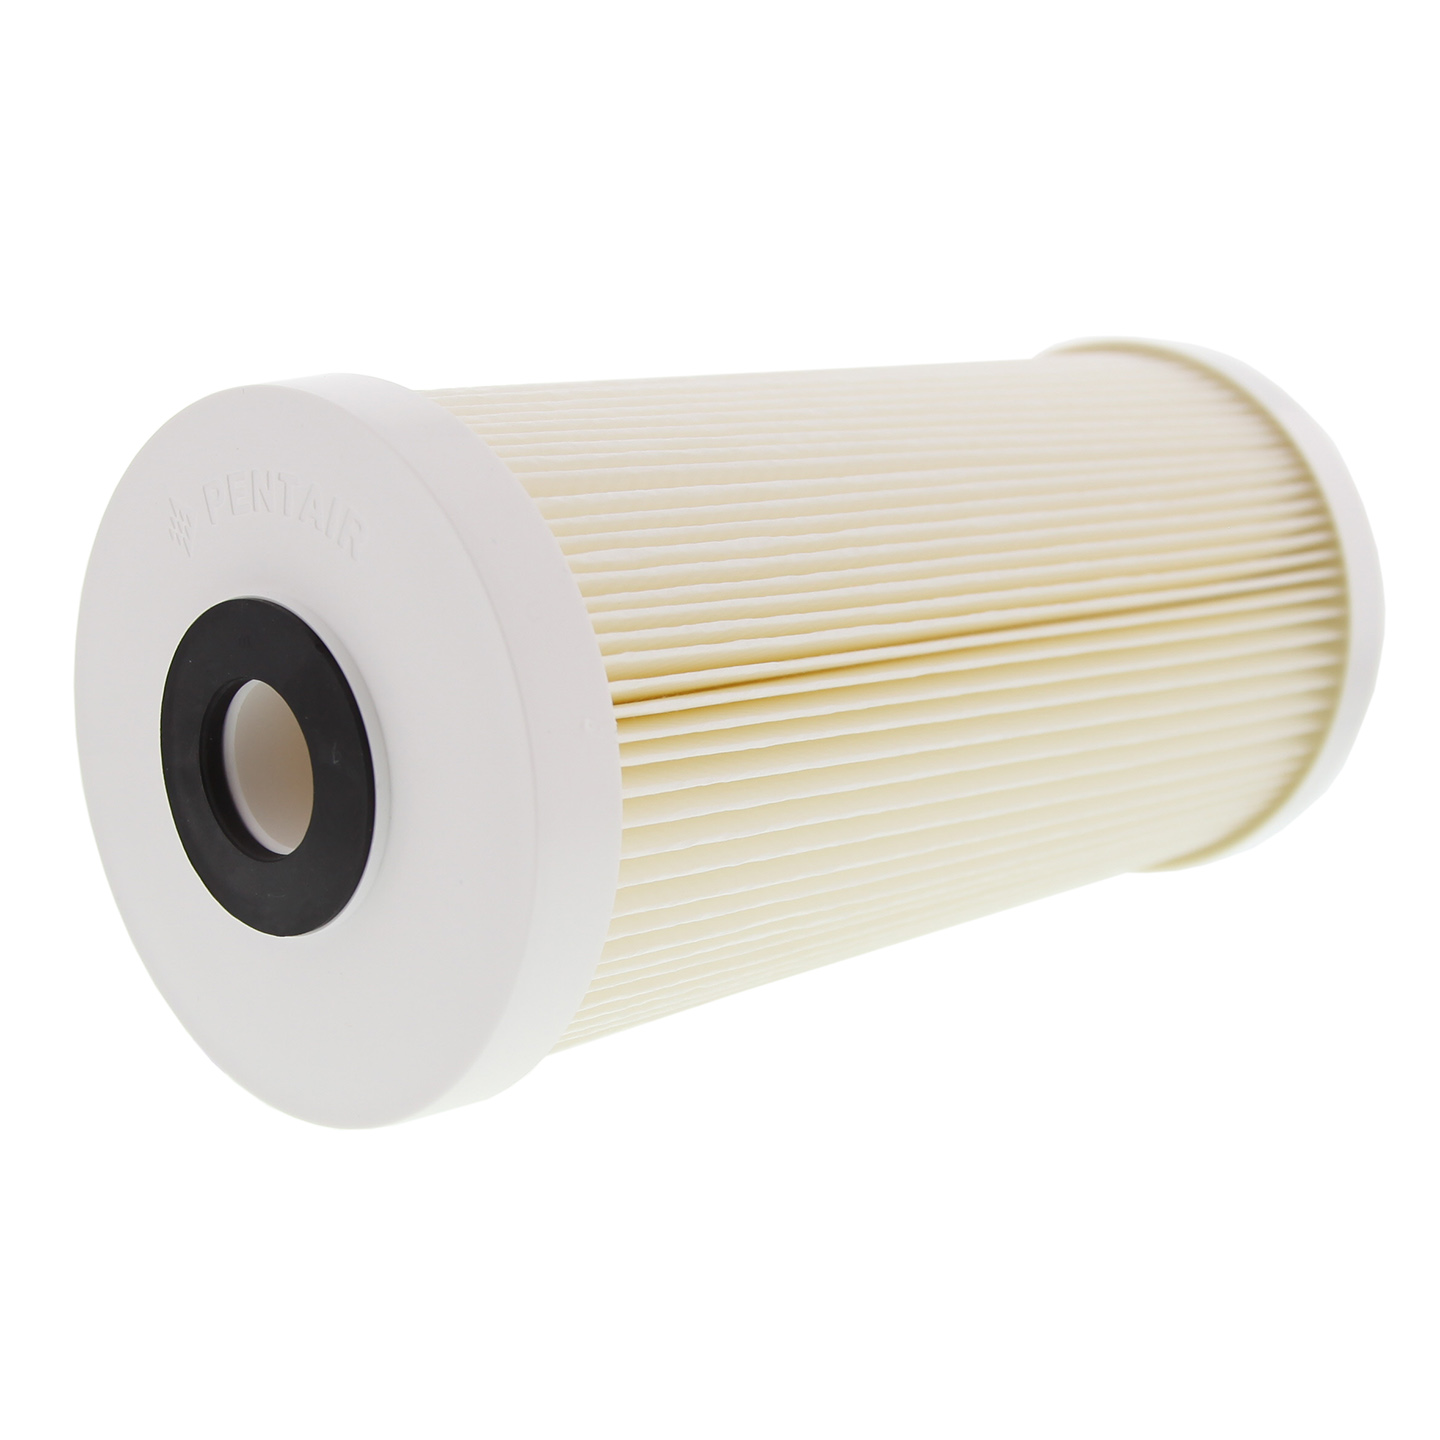 Pentair Pentek ECP5-BB 10" Big Blue Whole House Pleated Cellulose Polyester Sediment Water Filter - 5 Micron - image 3 of 5